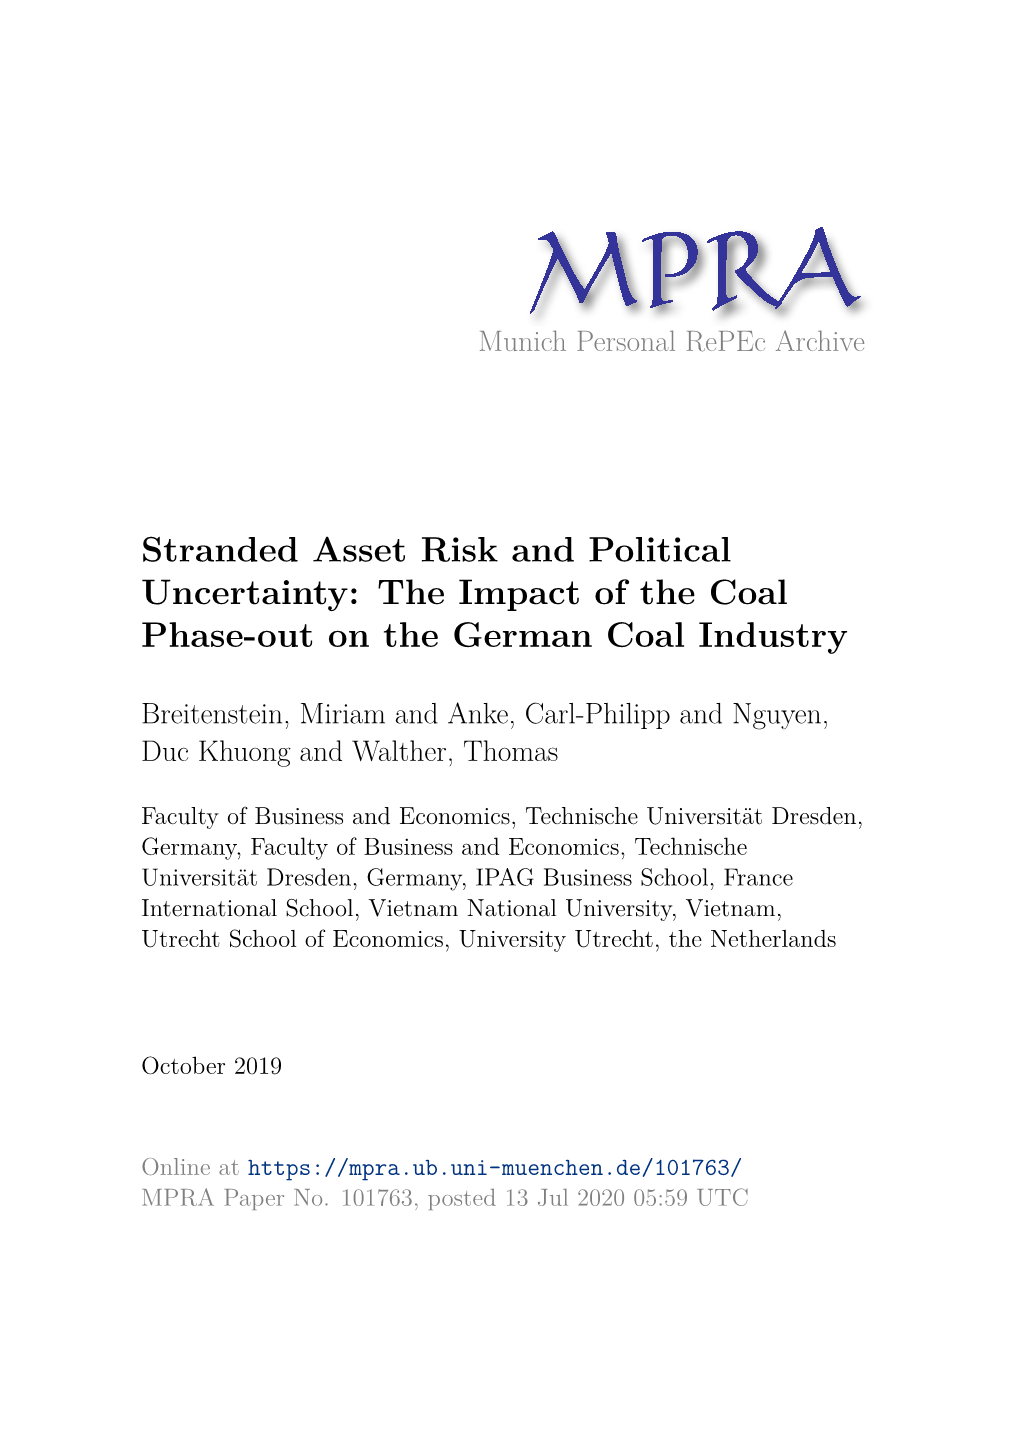 Stranded Asset Risk and Political Uncertainty: the Impact of the Coal Phase-Out on the German Coal Industry